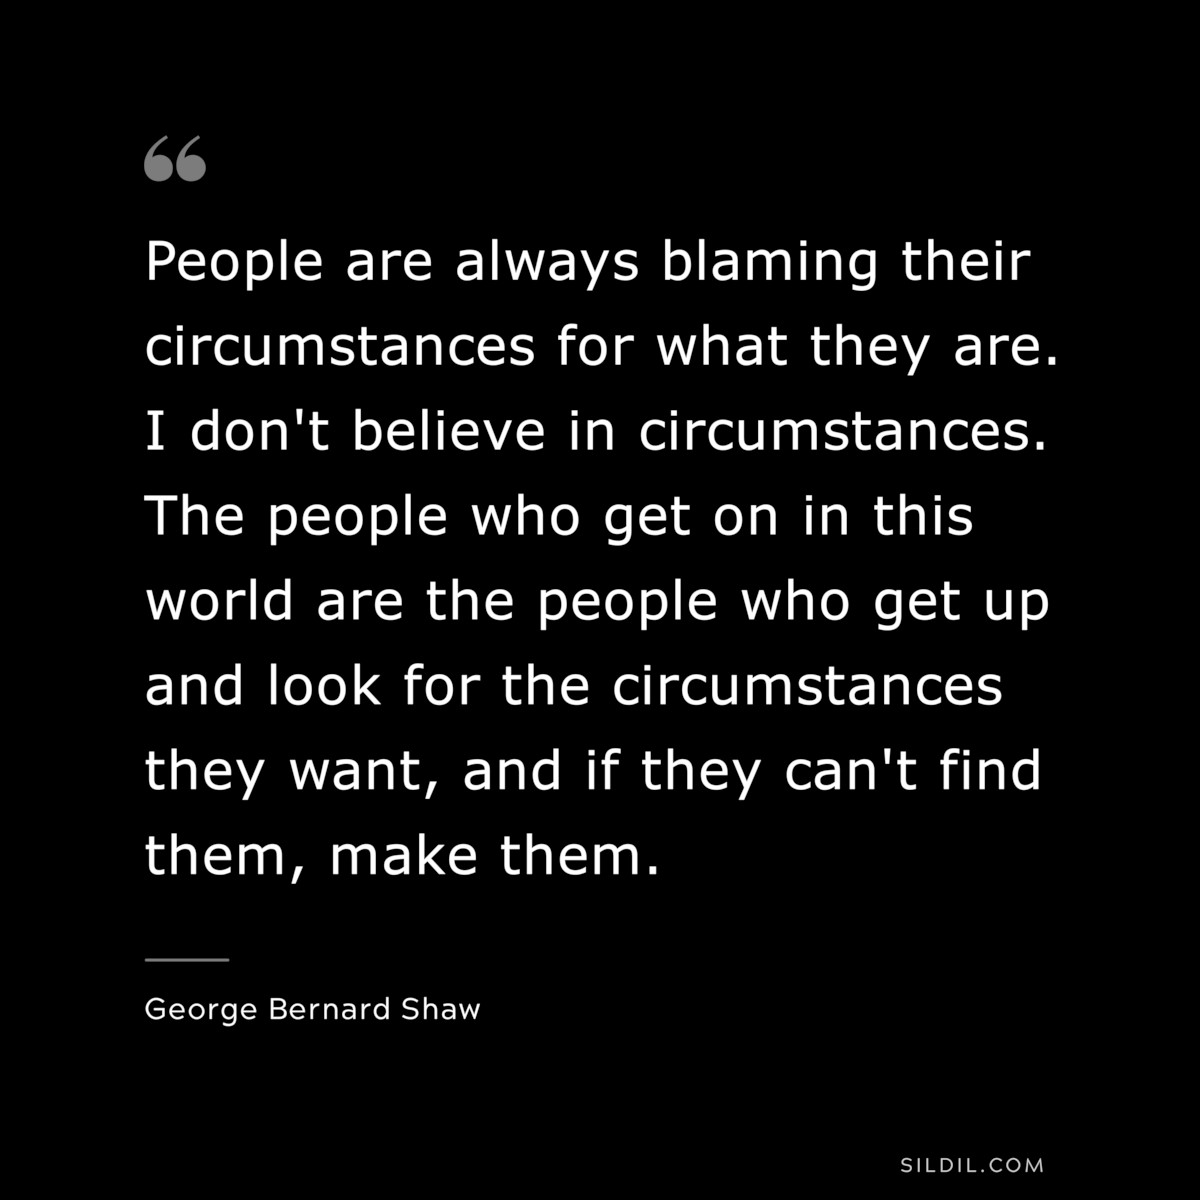 People are always blaming their circumstances for what they are. I don't believe in circumstances. The people who get on in this world are the people who get up and look for the circumstances they want, and if they can't find them, make them. ― George Bernard Shaw